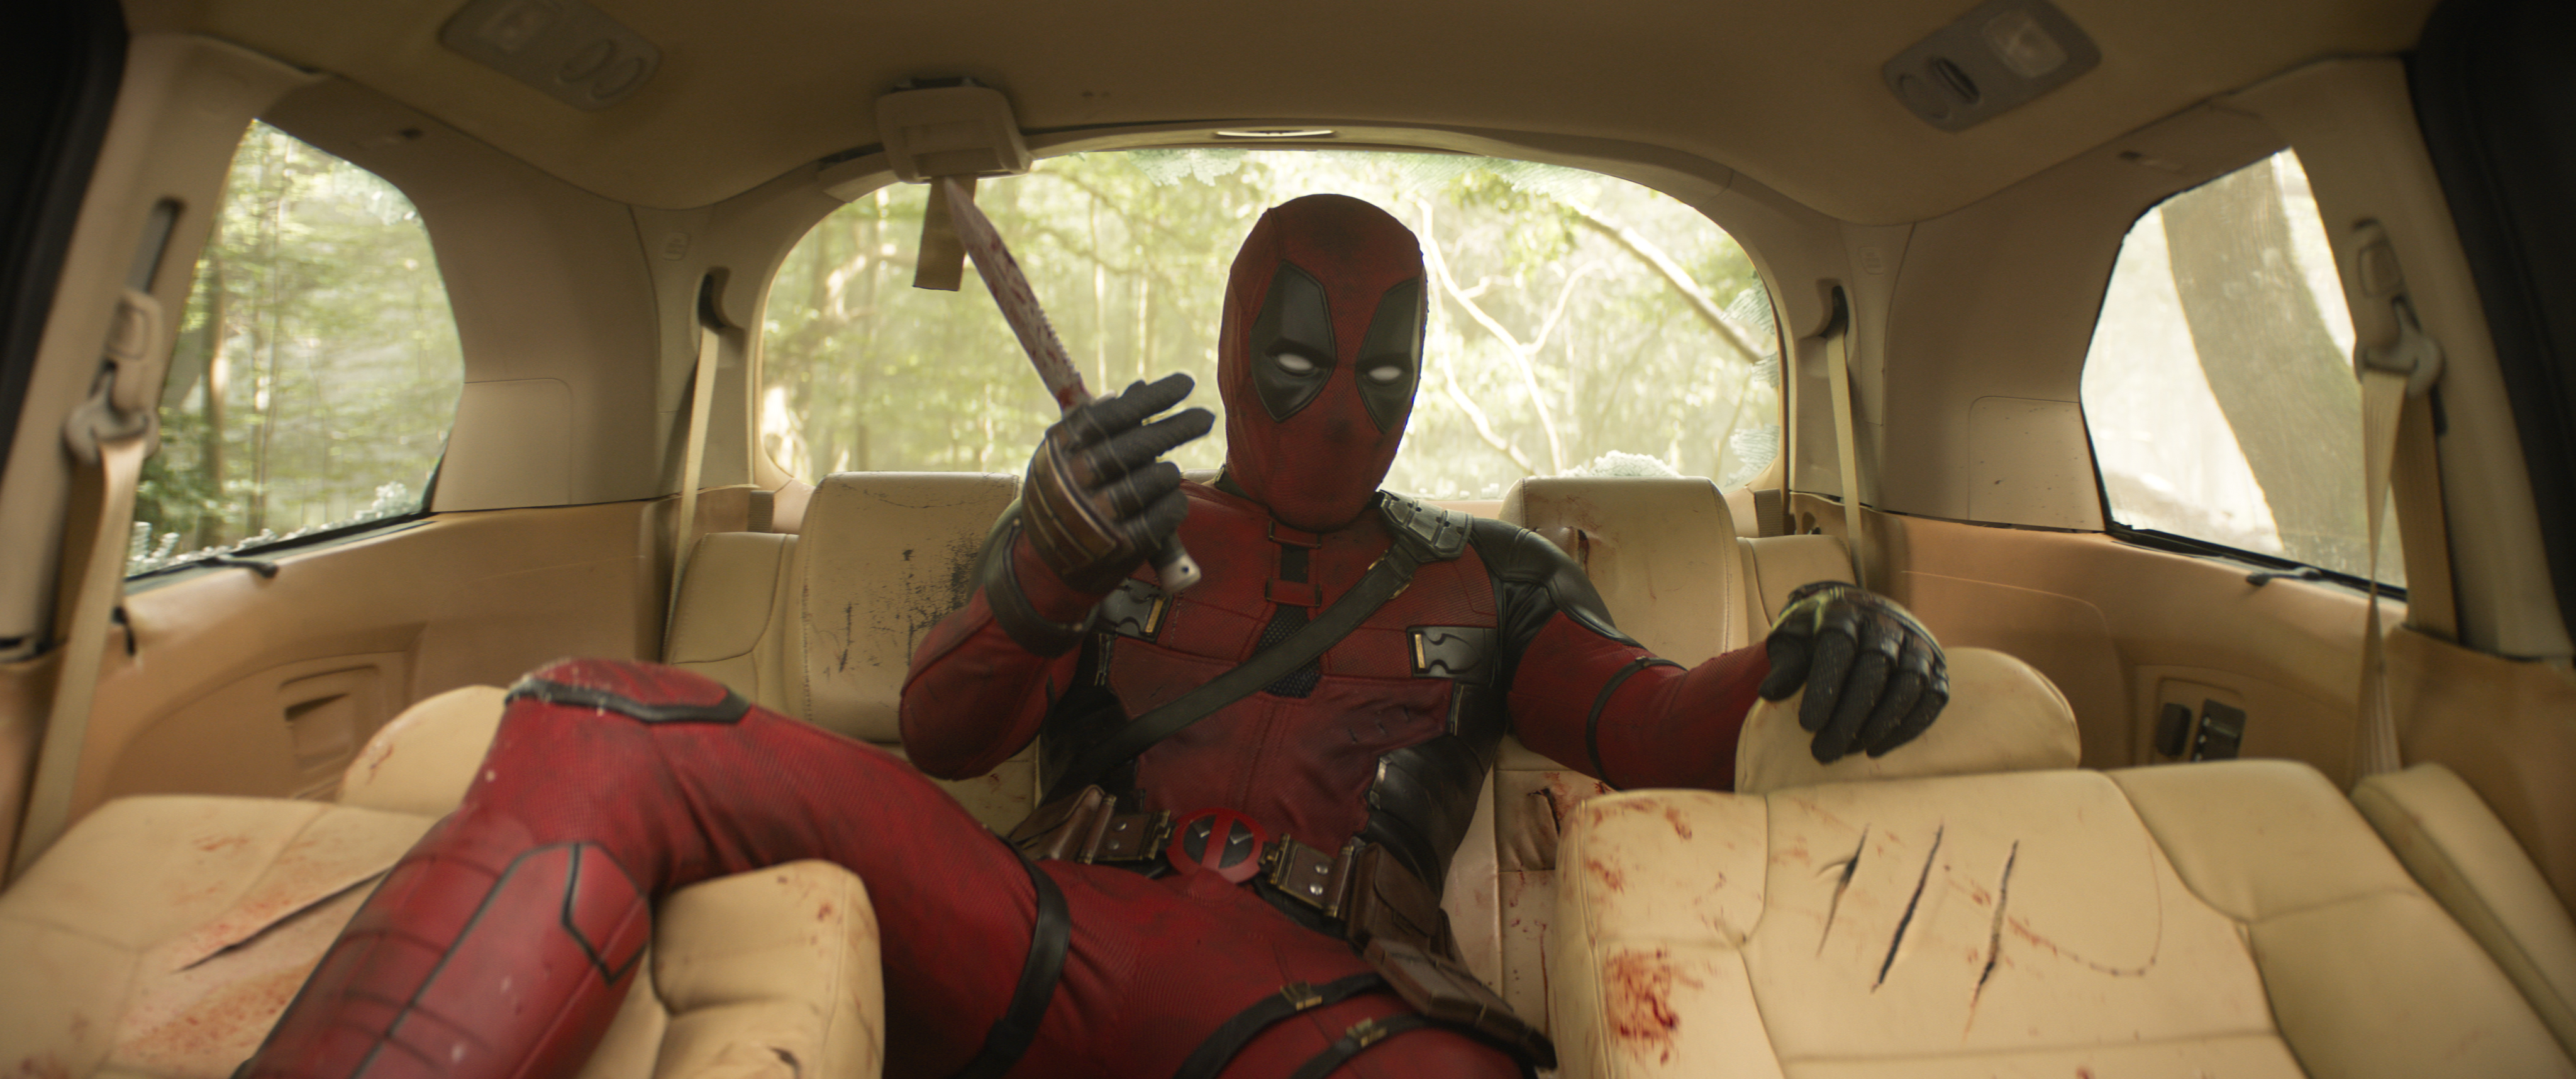 ‘deadpool 3' dethrones ‘spider-man: no way home' as most-viewed trailer launch with 365 million views